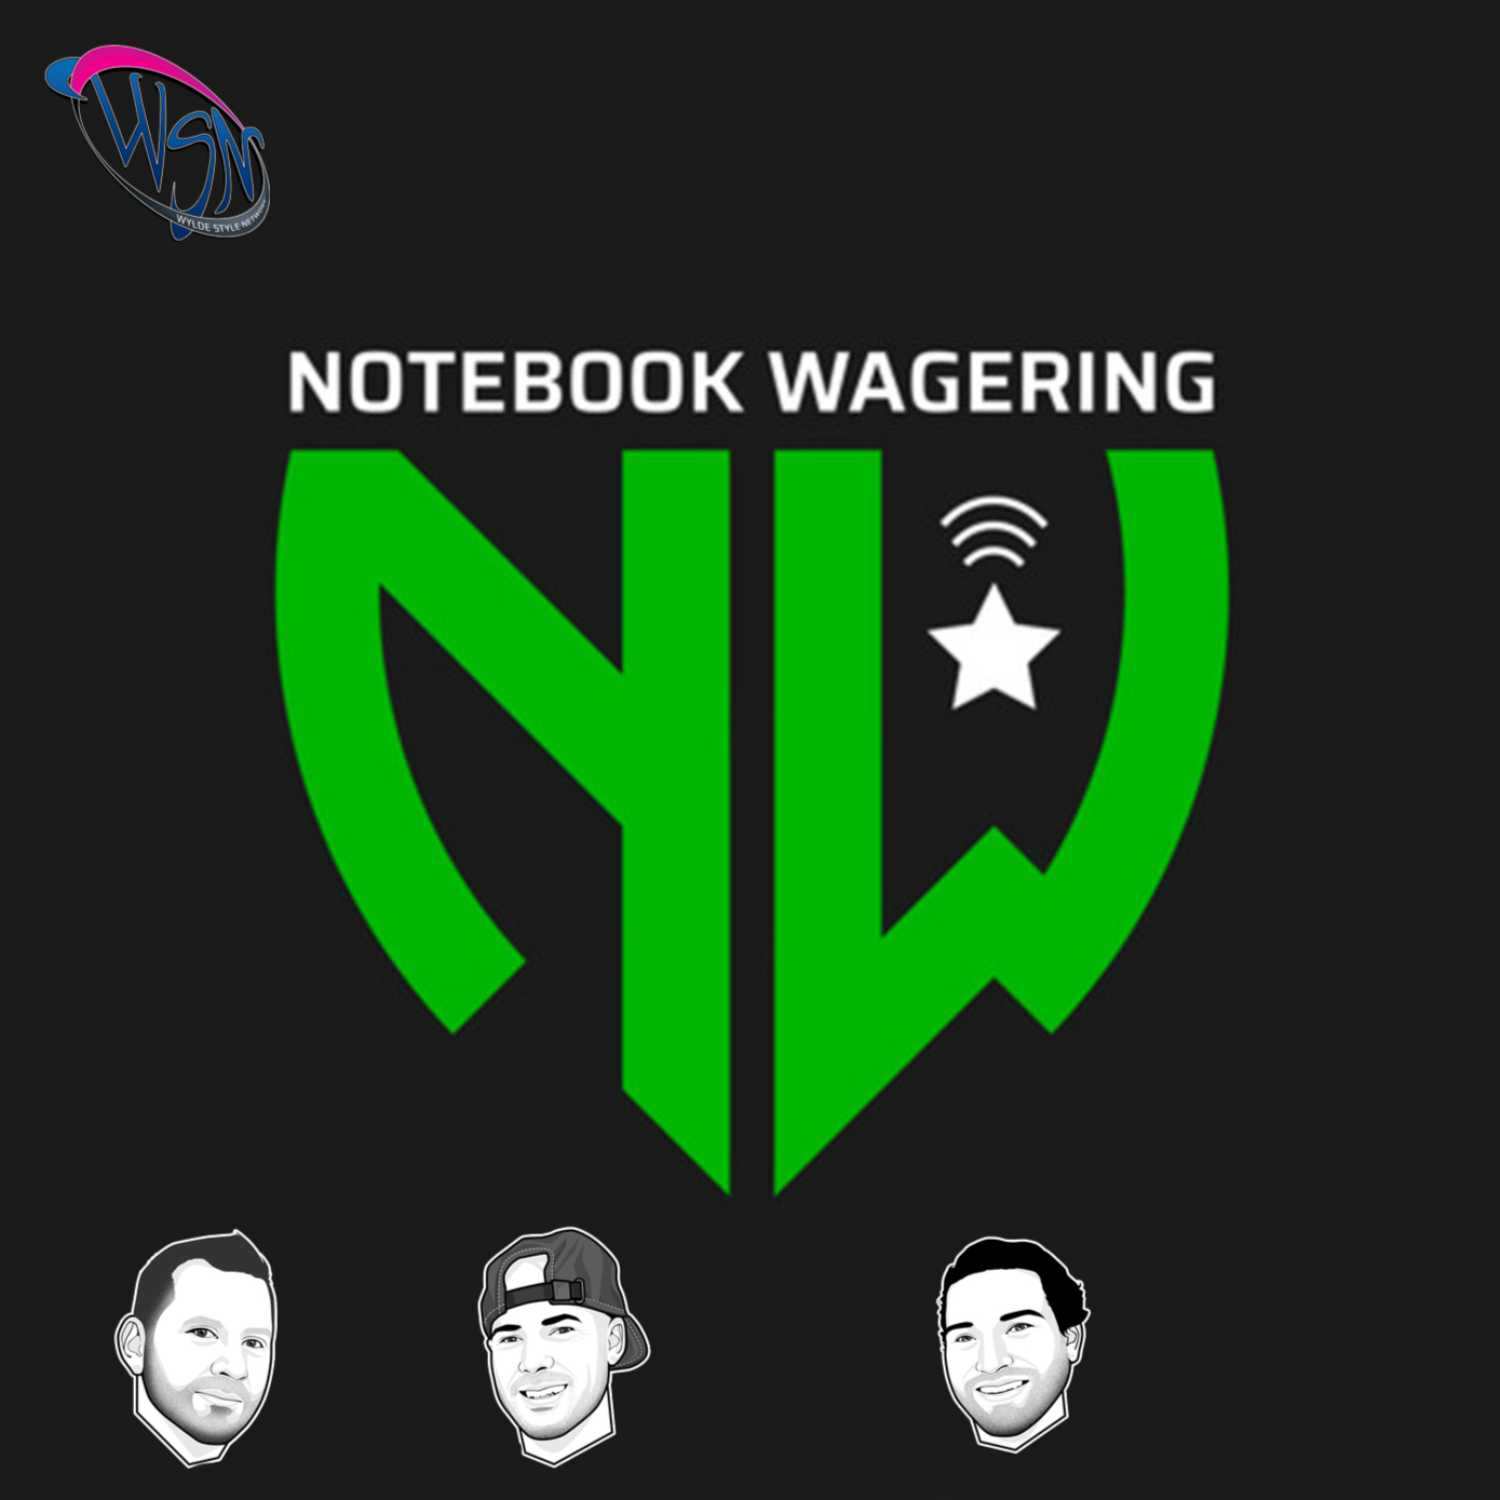 Quarterback Hot Mess Express | Notebook Wagering | Wylde Style Network...Fueled by Monster Energy